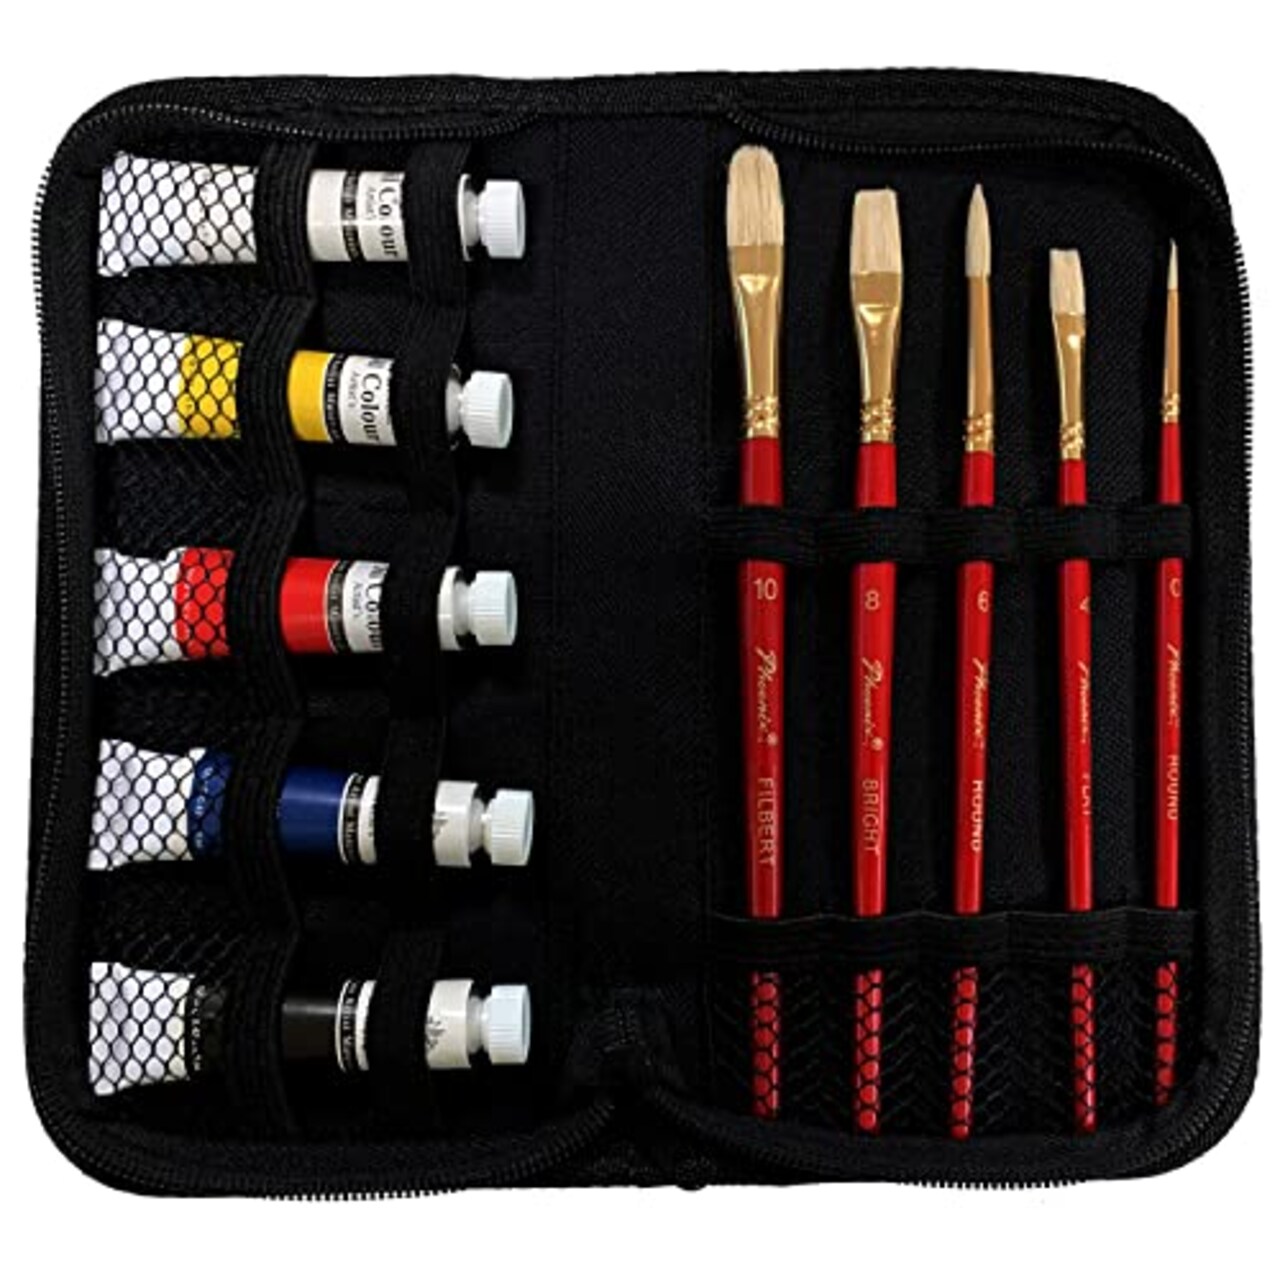 PHOENIX Oil Painting Kit - 5 Primary Color Tubes of Oil Paints (12ml/0.4 Fl  Oz) & 5 Oil Paint Brushes - Oil Color Painting Supplies for Kids, Students  & Beginners